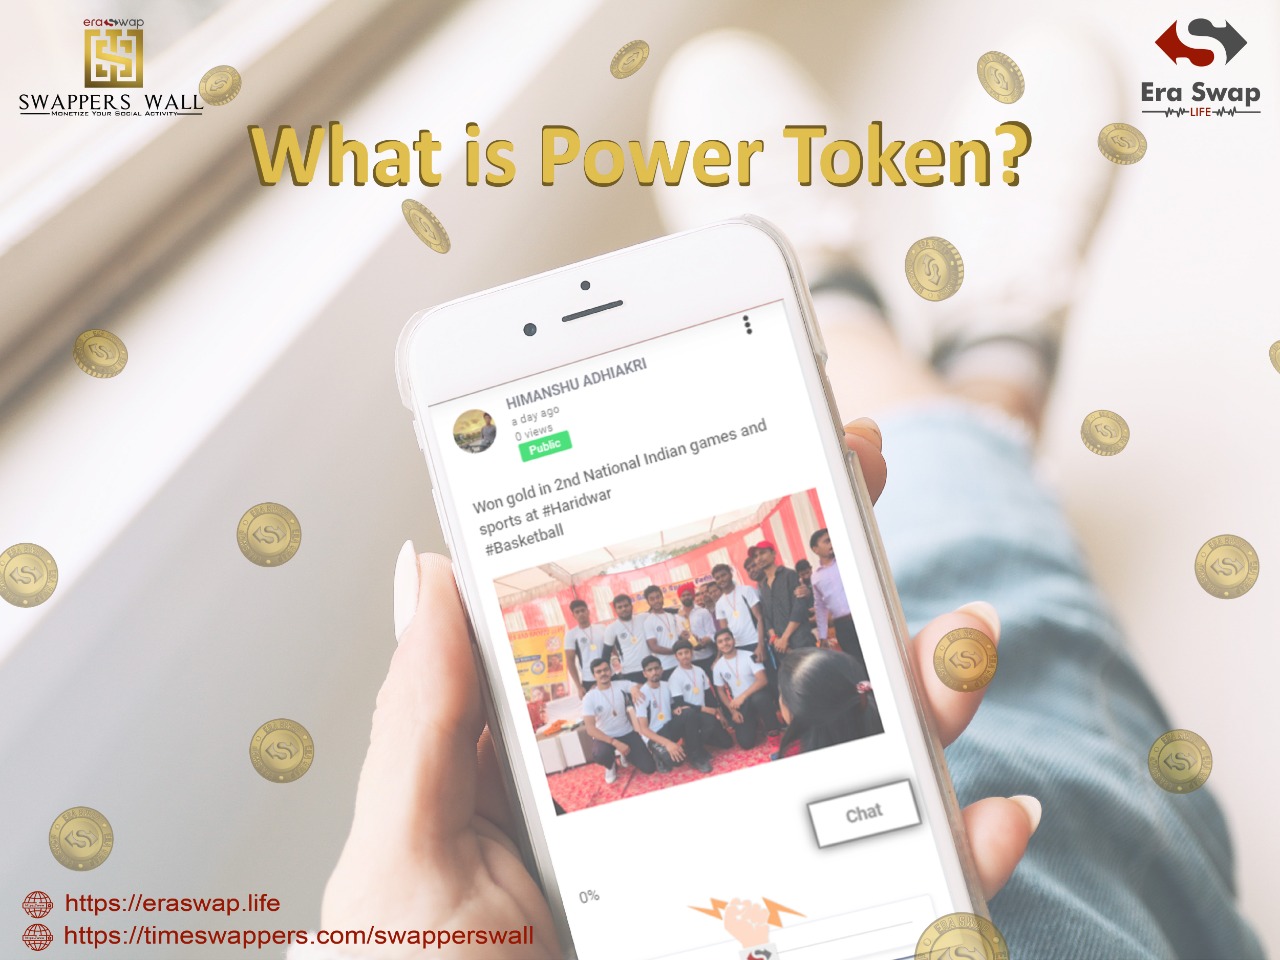 Power Token - As a reward on the Swappers Wall Social media platform.